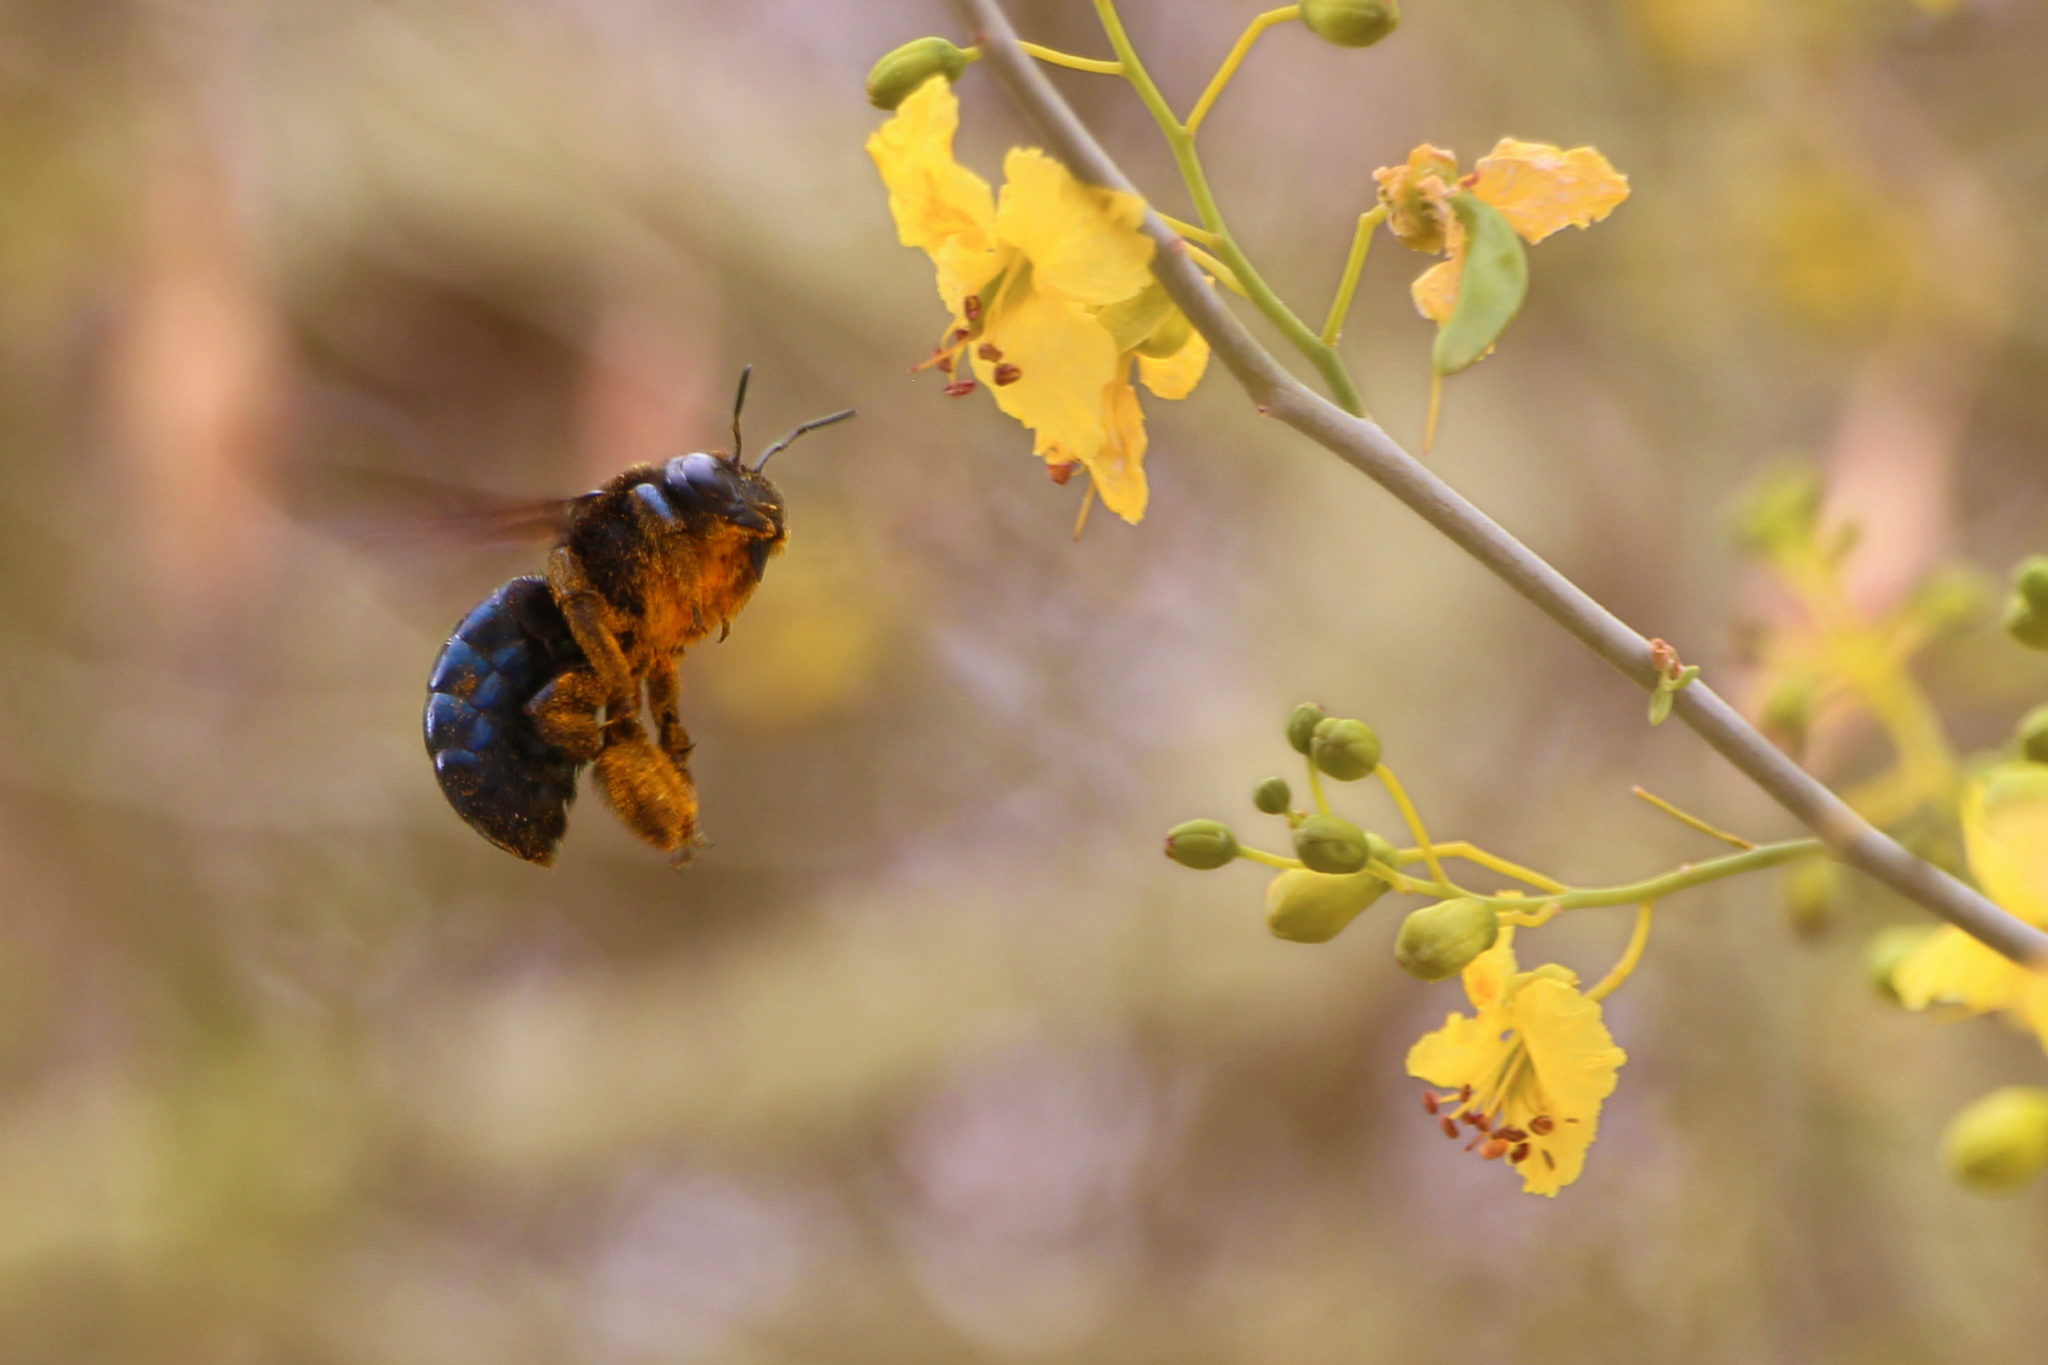 Bee hovering near a yellow flower